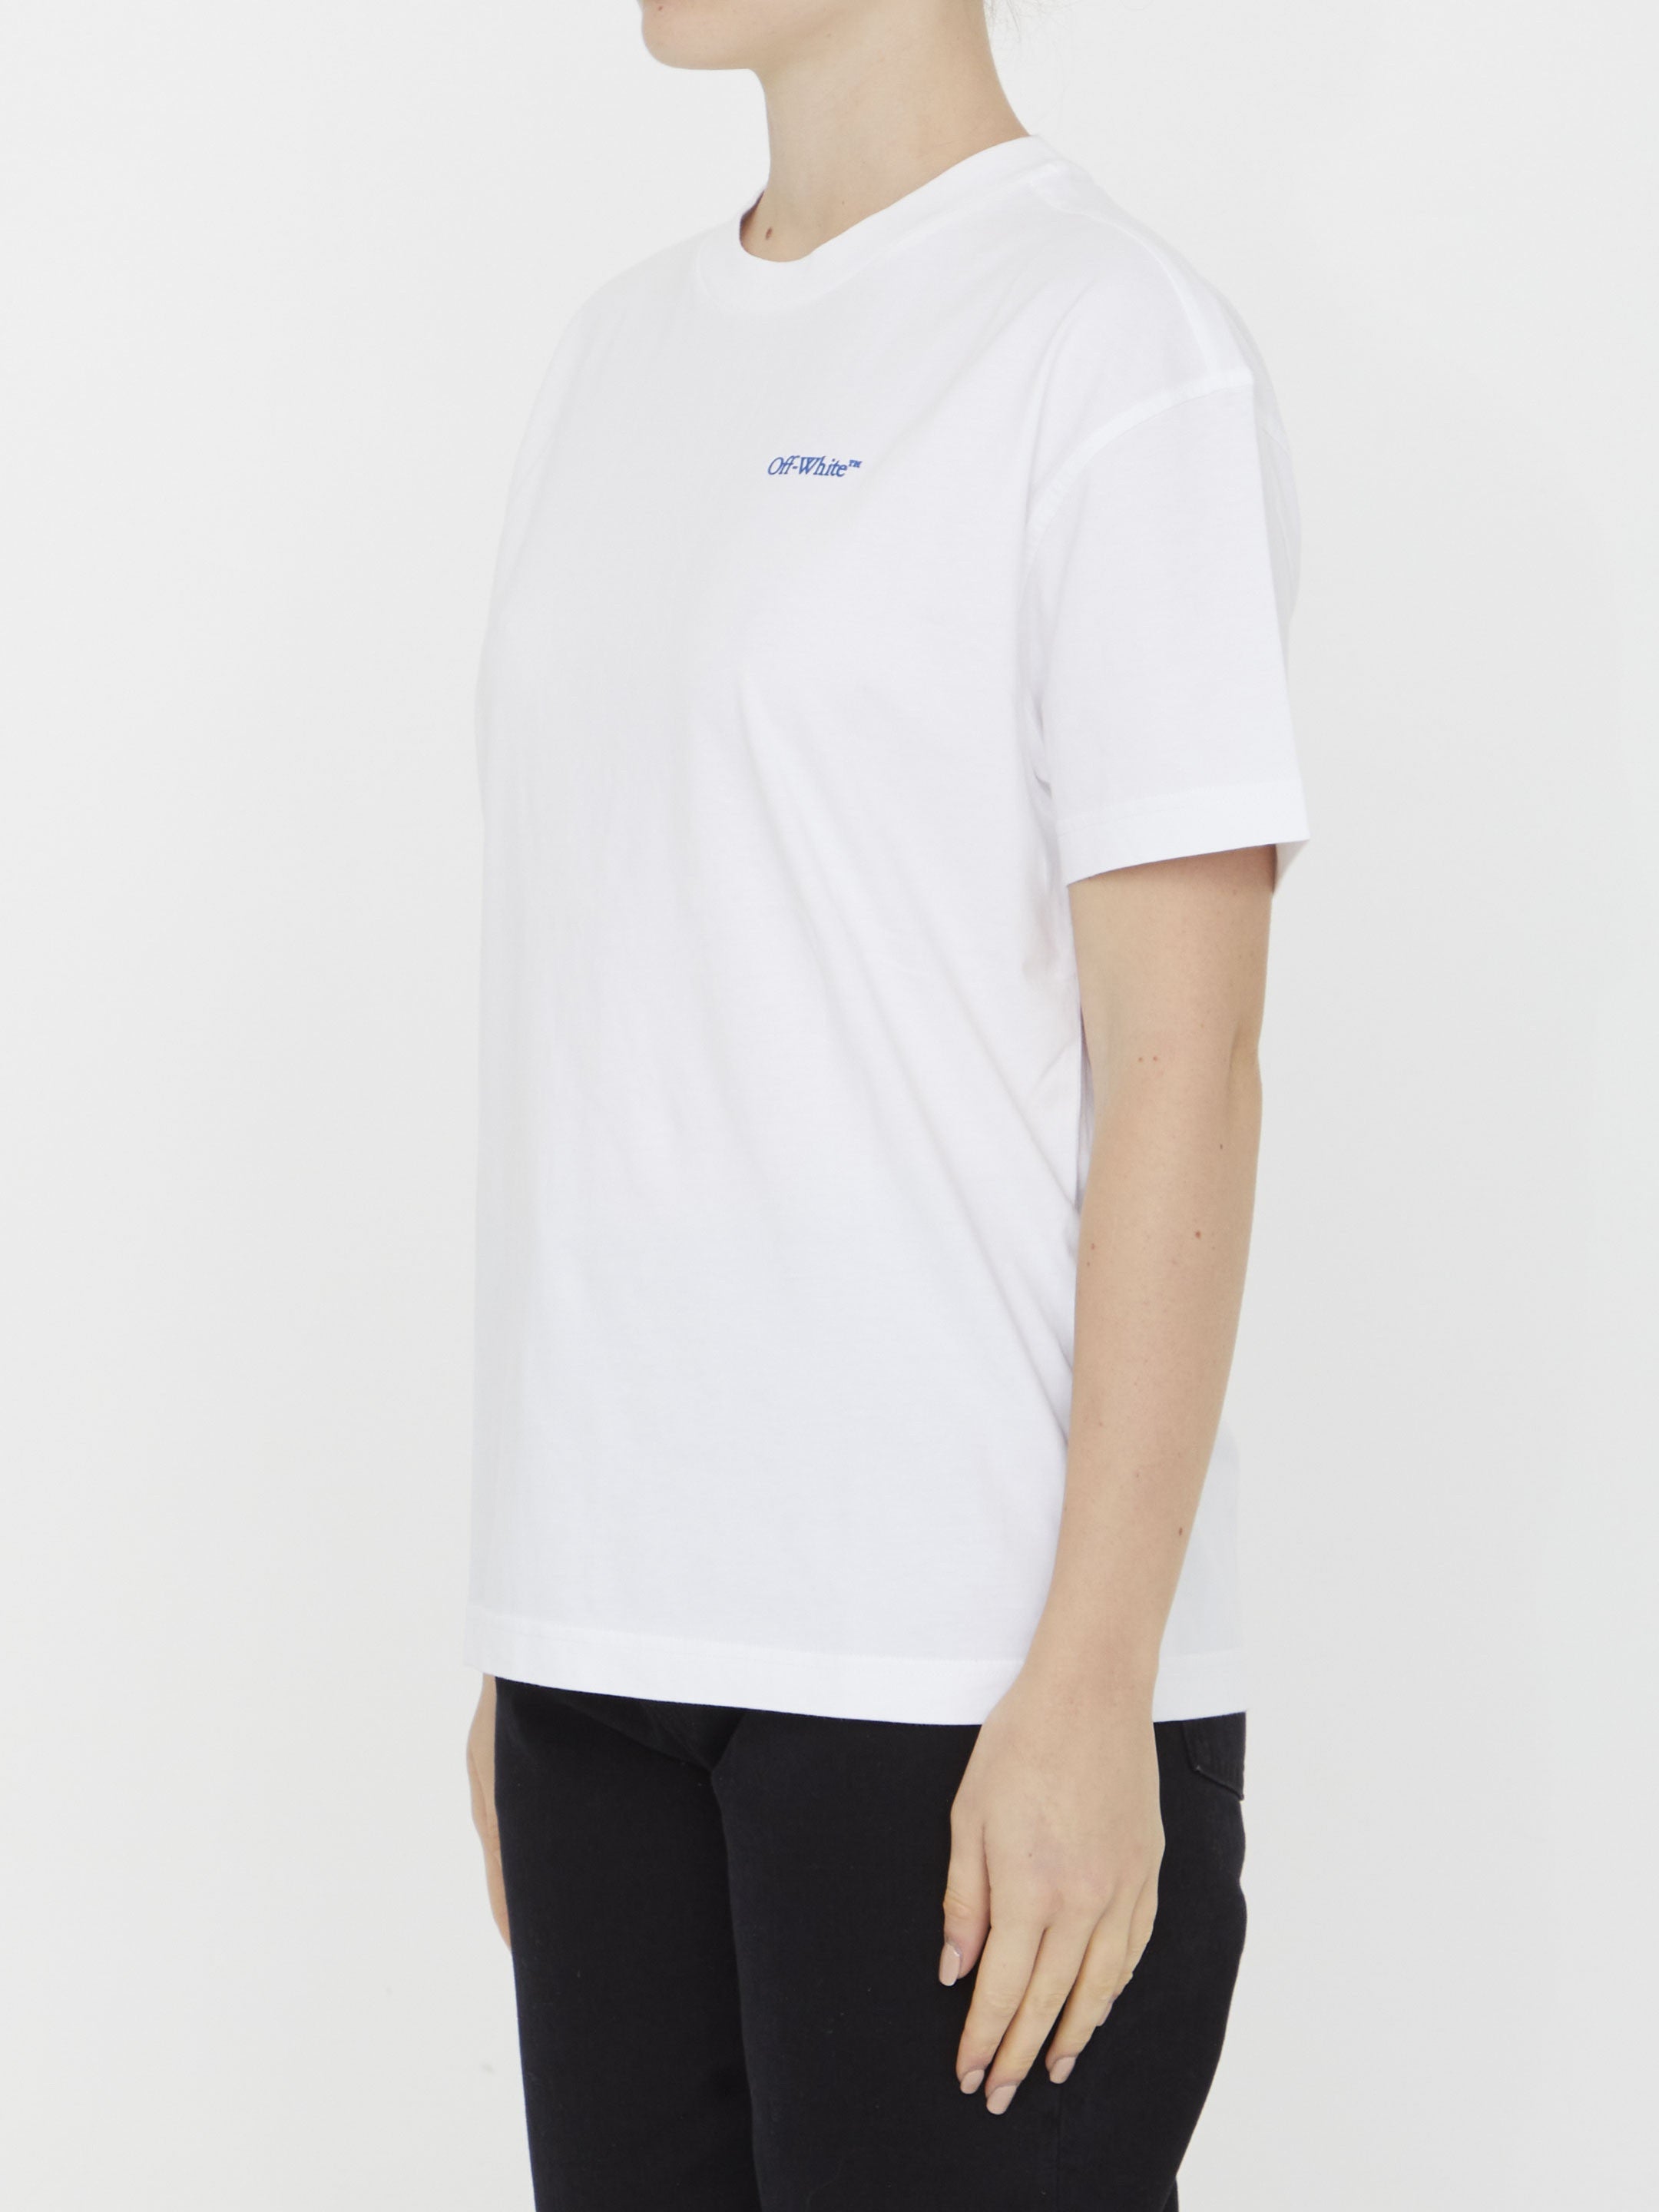 OFF-WHITE-OUTLET-SALE-Diag-Tab-t-shirt-Shirts-XS-WHITE-ARCHIVE-COLLECTION-2.jpg